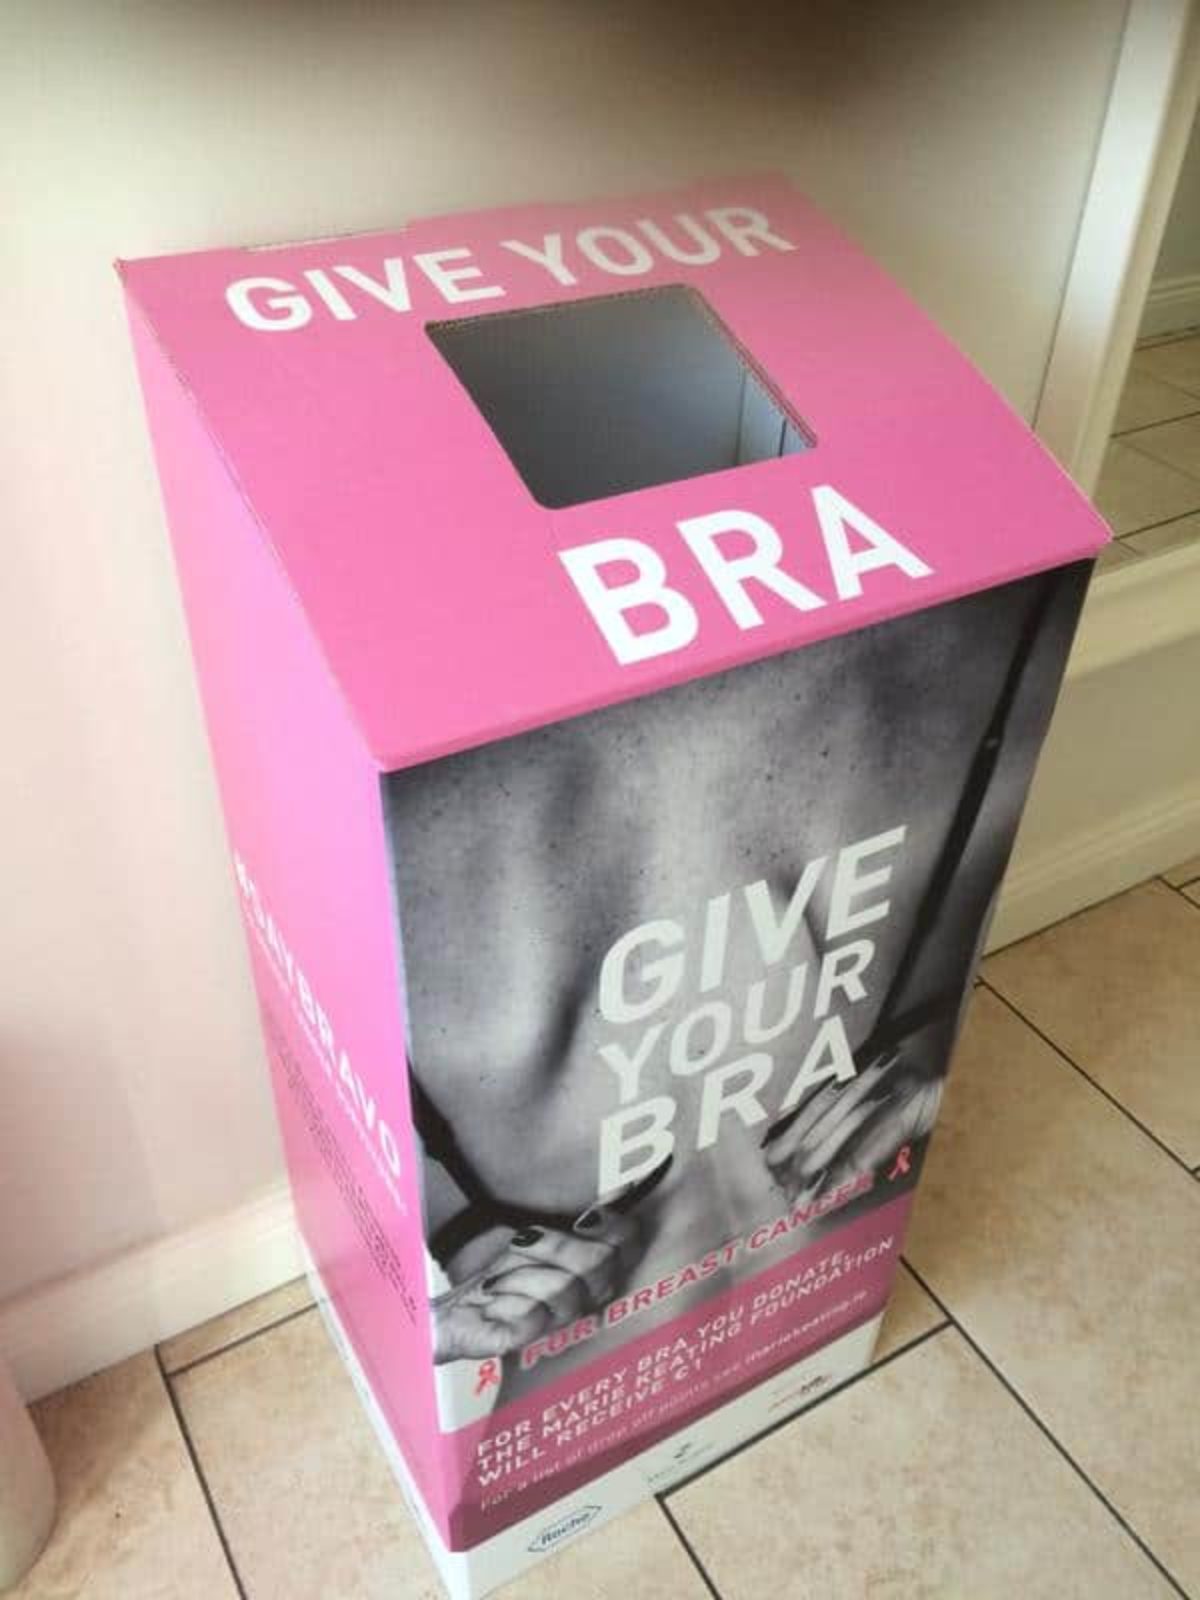 Donating to Donate your bra